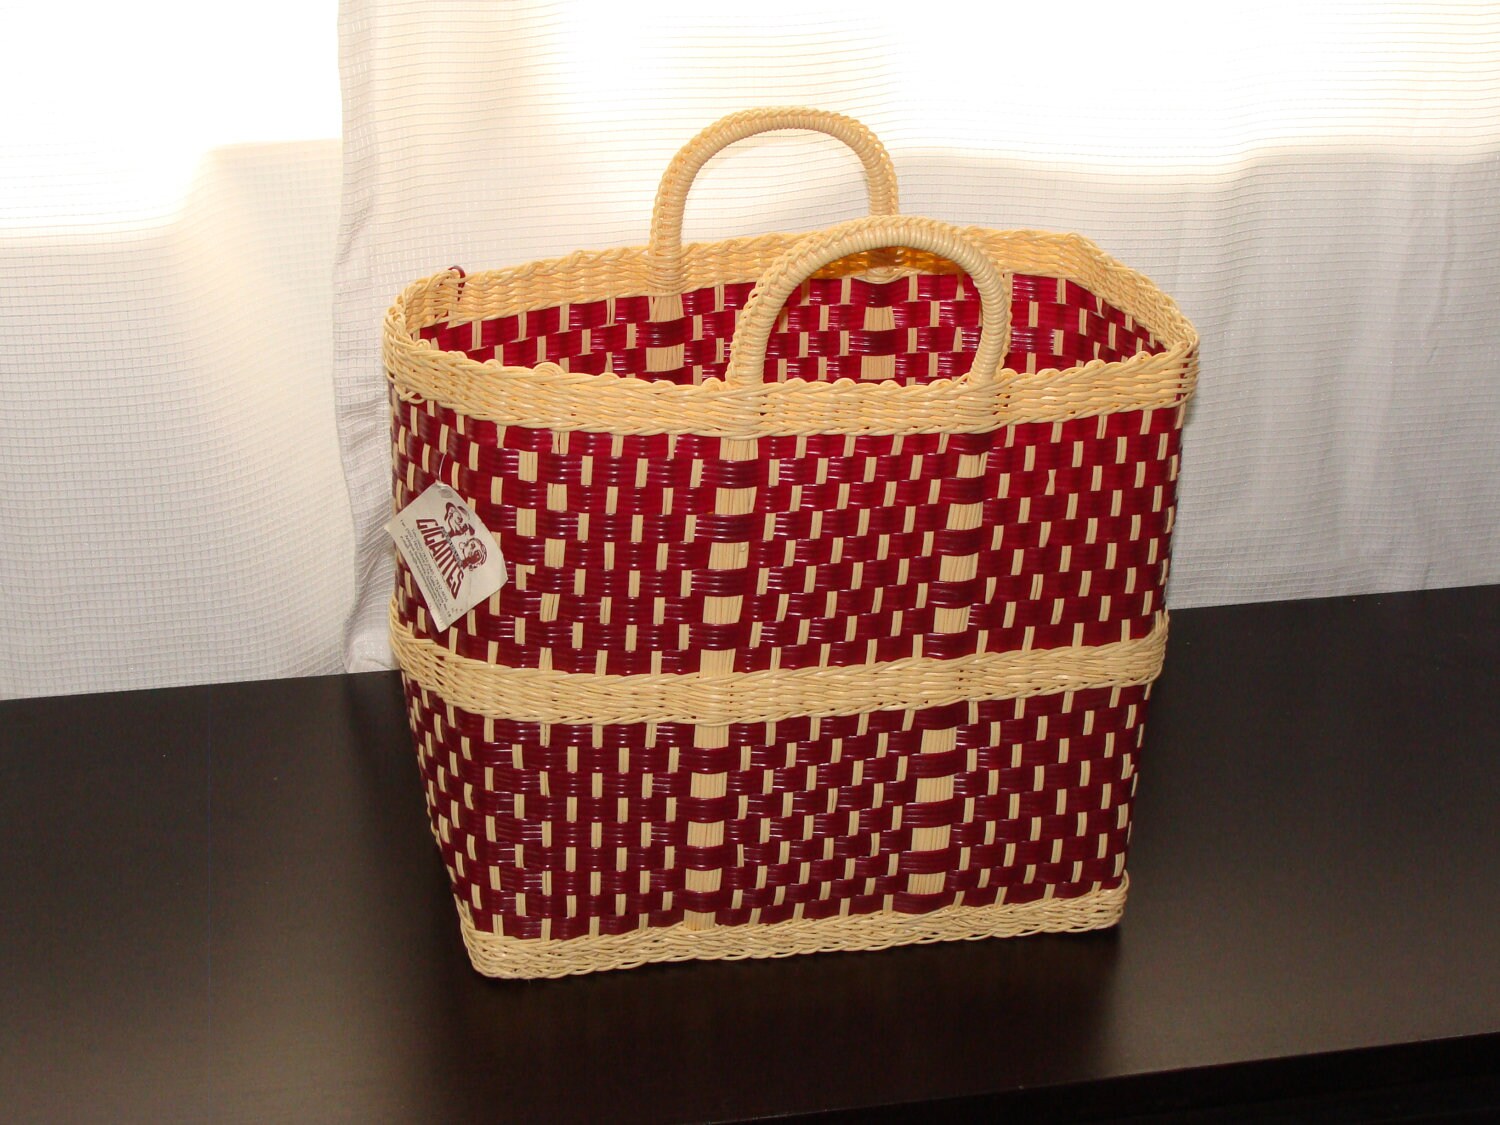 Hand Woven Plastic Basket/Tote Bag by CasadelosGigantes on